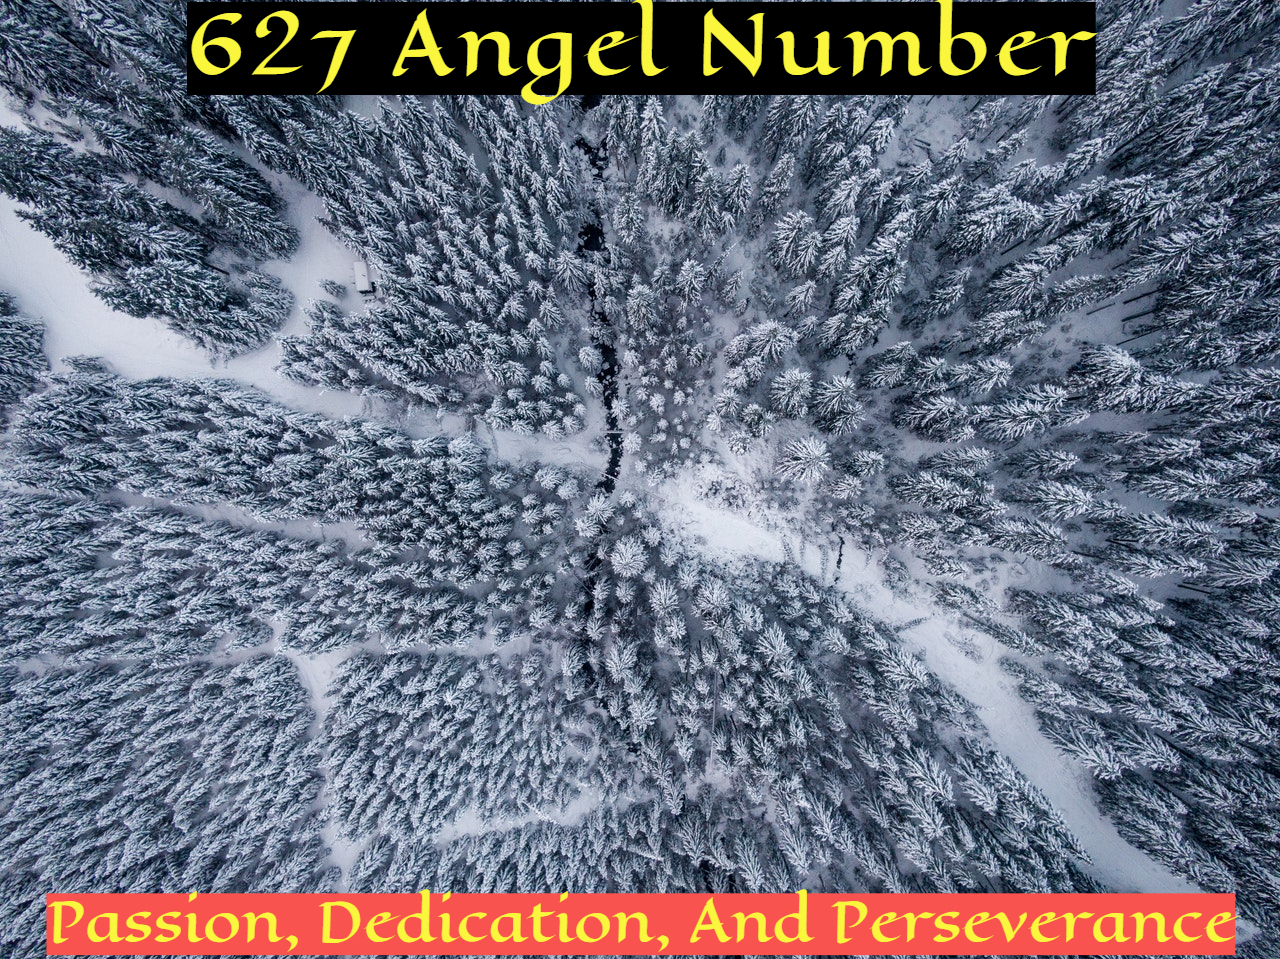 627 Angel Number - Represents Engaging And Pleasant Personality